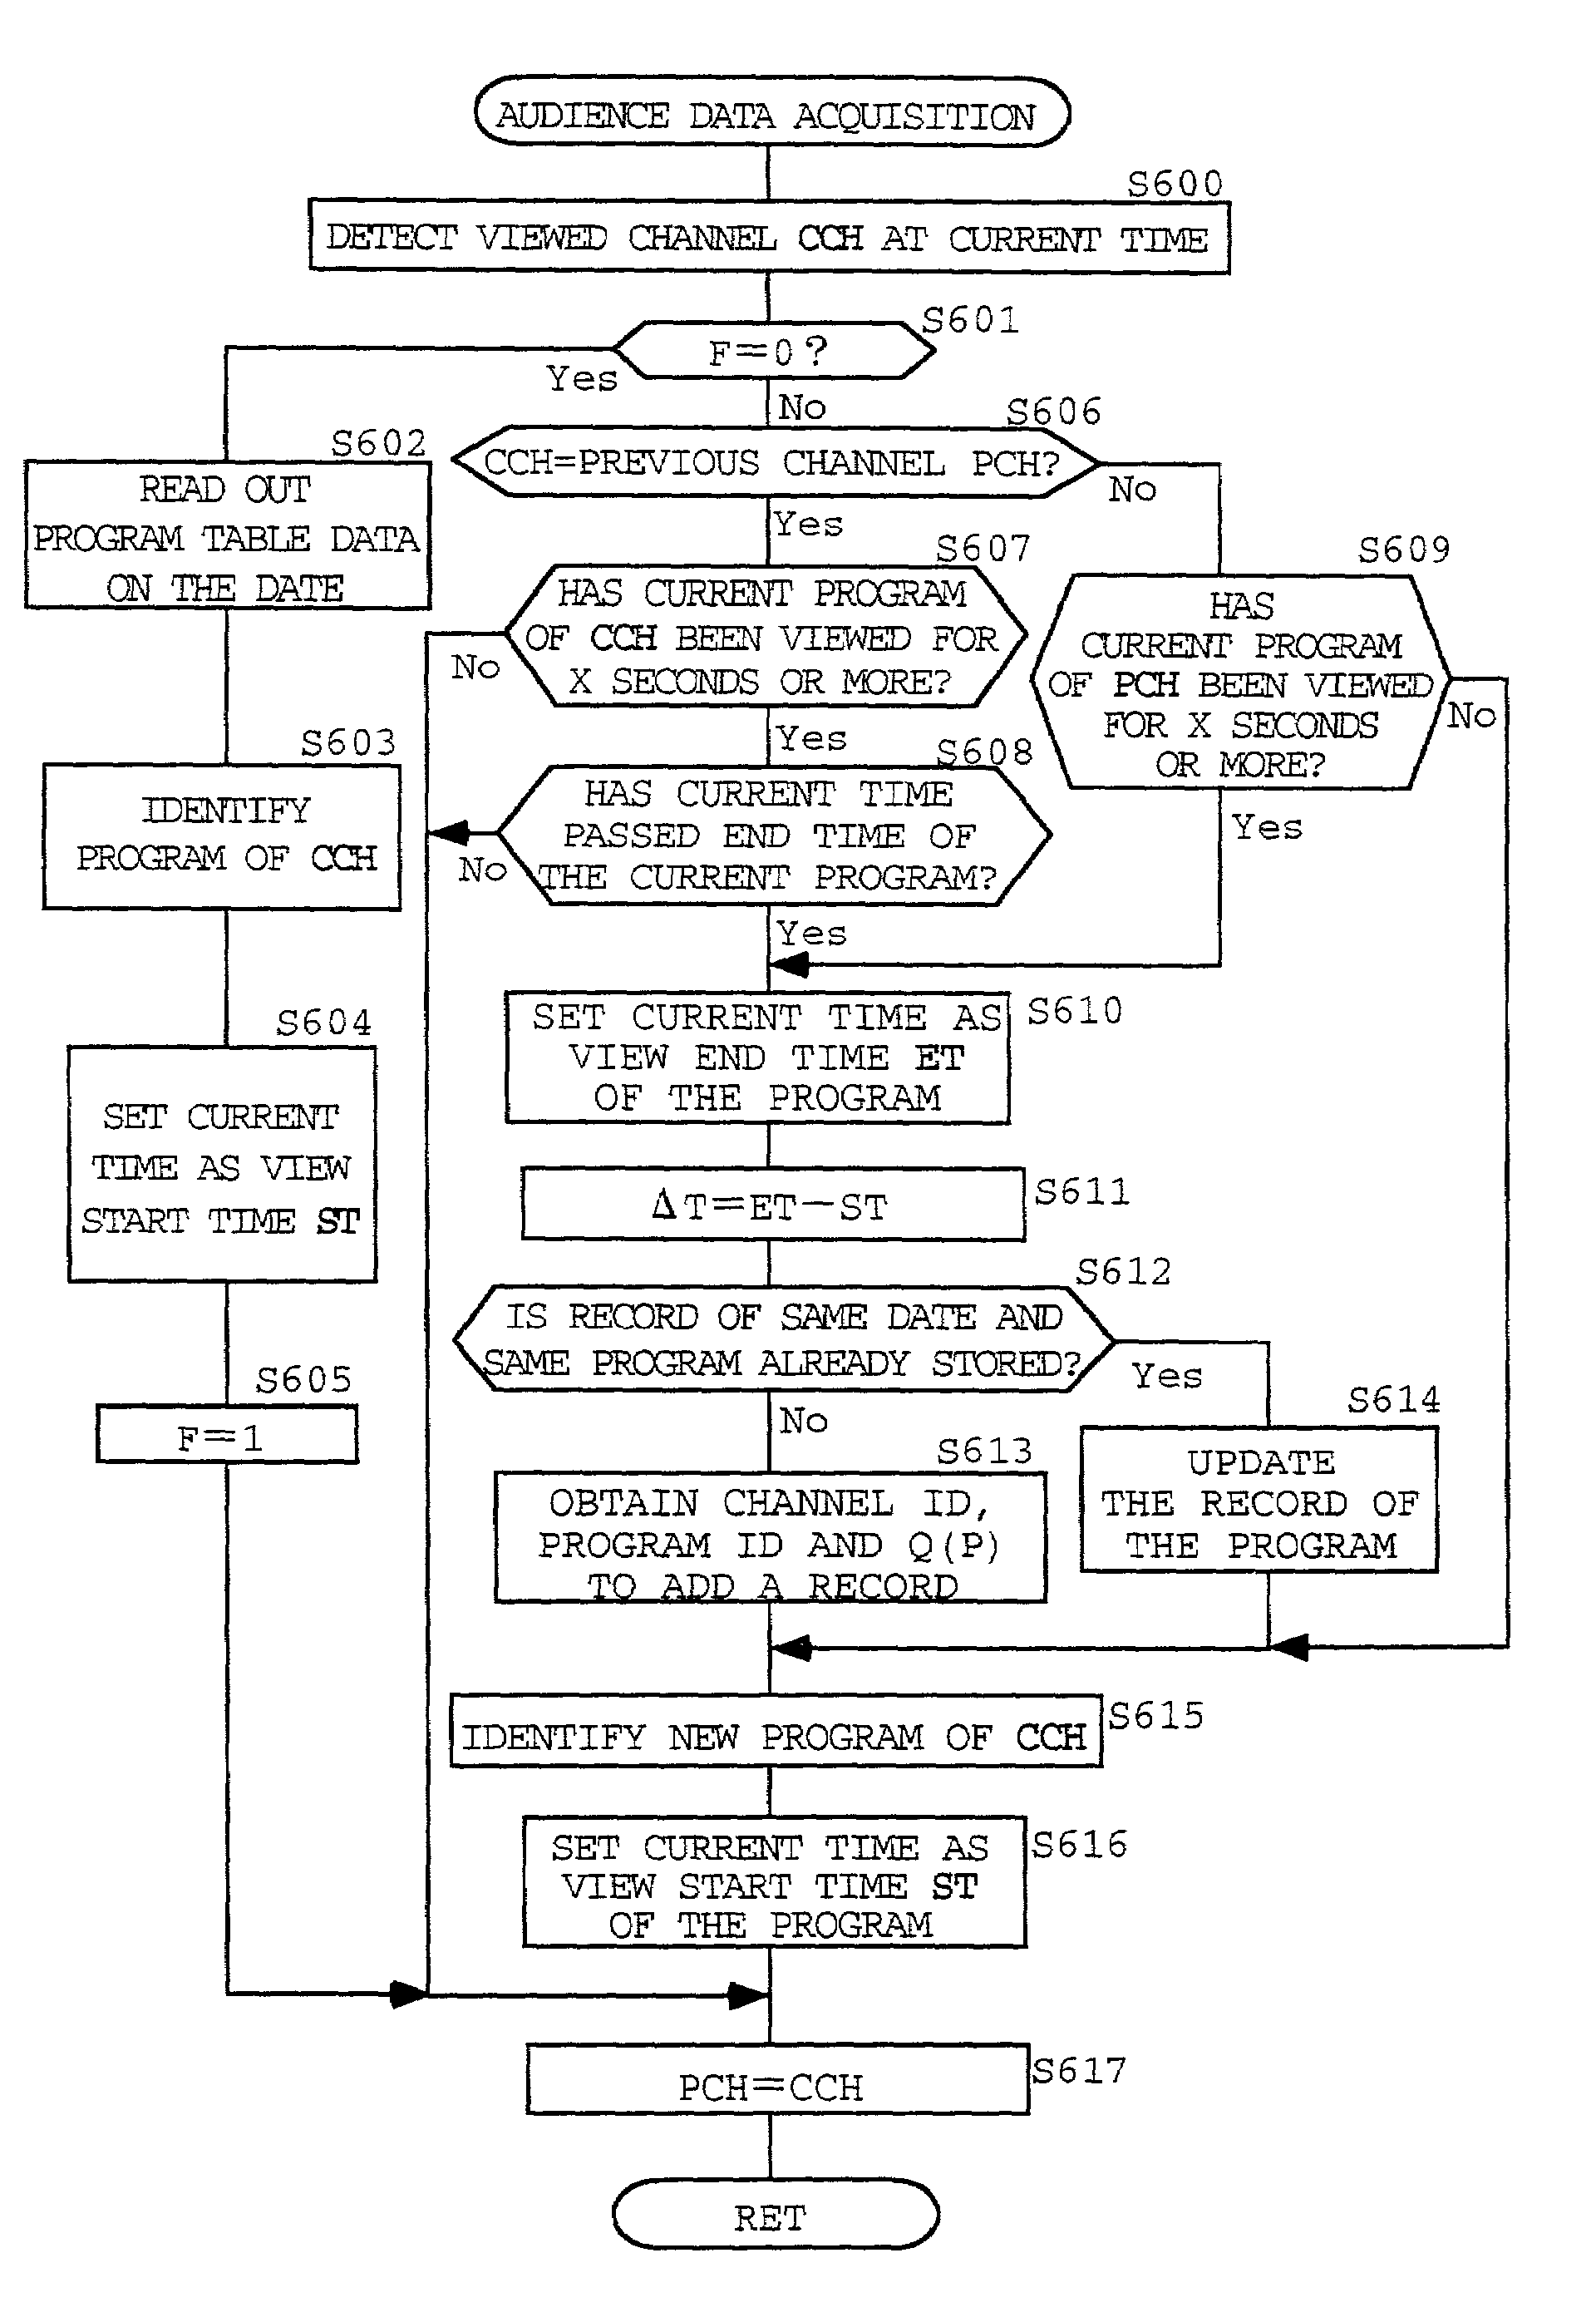 Method and device for obtaining audience data on TV program